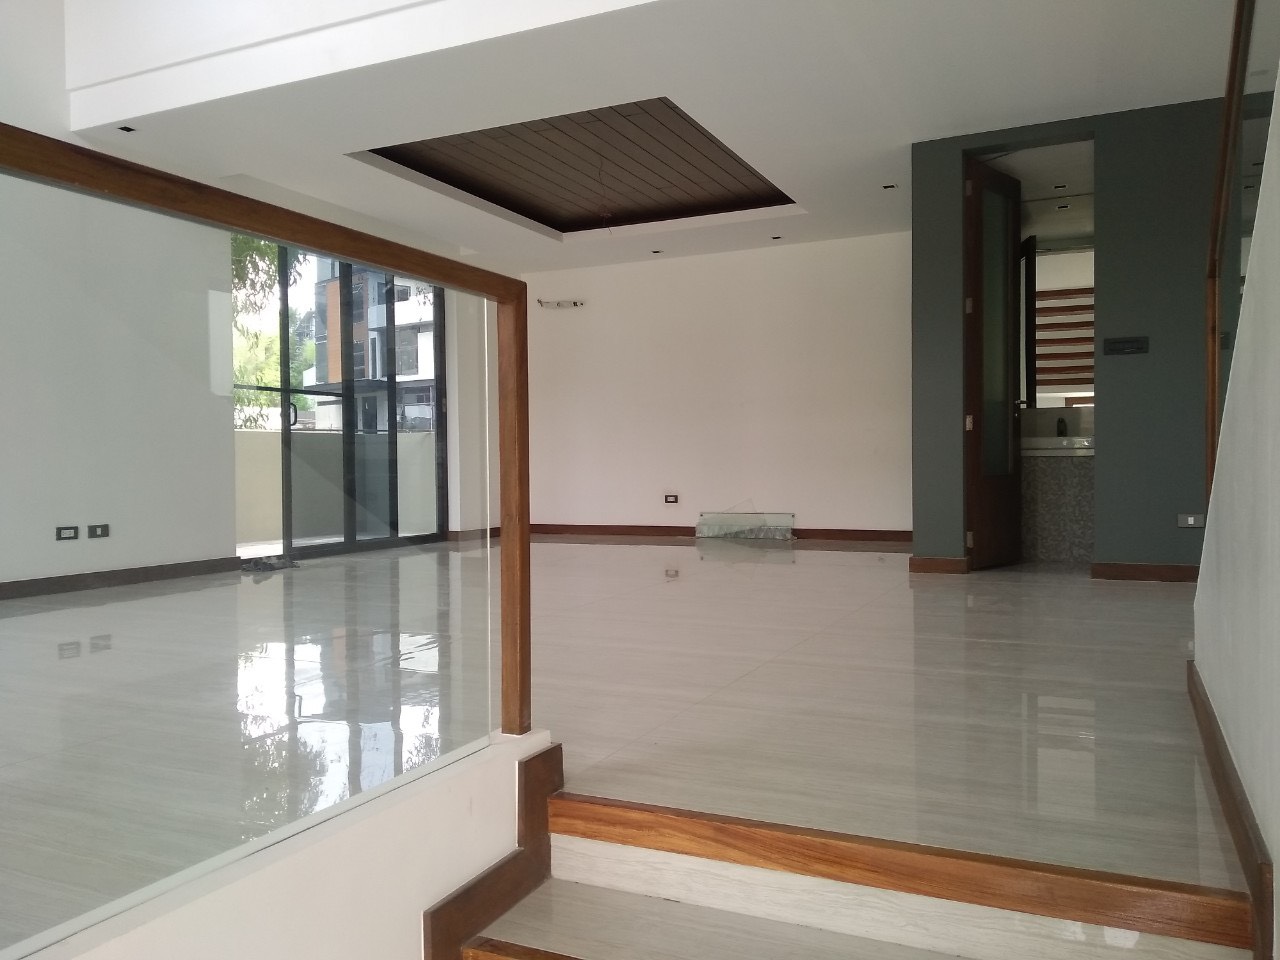 5BR House For Lease, McKinley Hill Village - 5